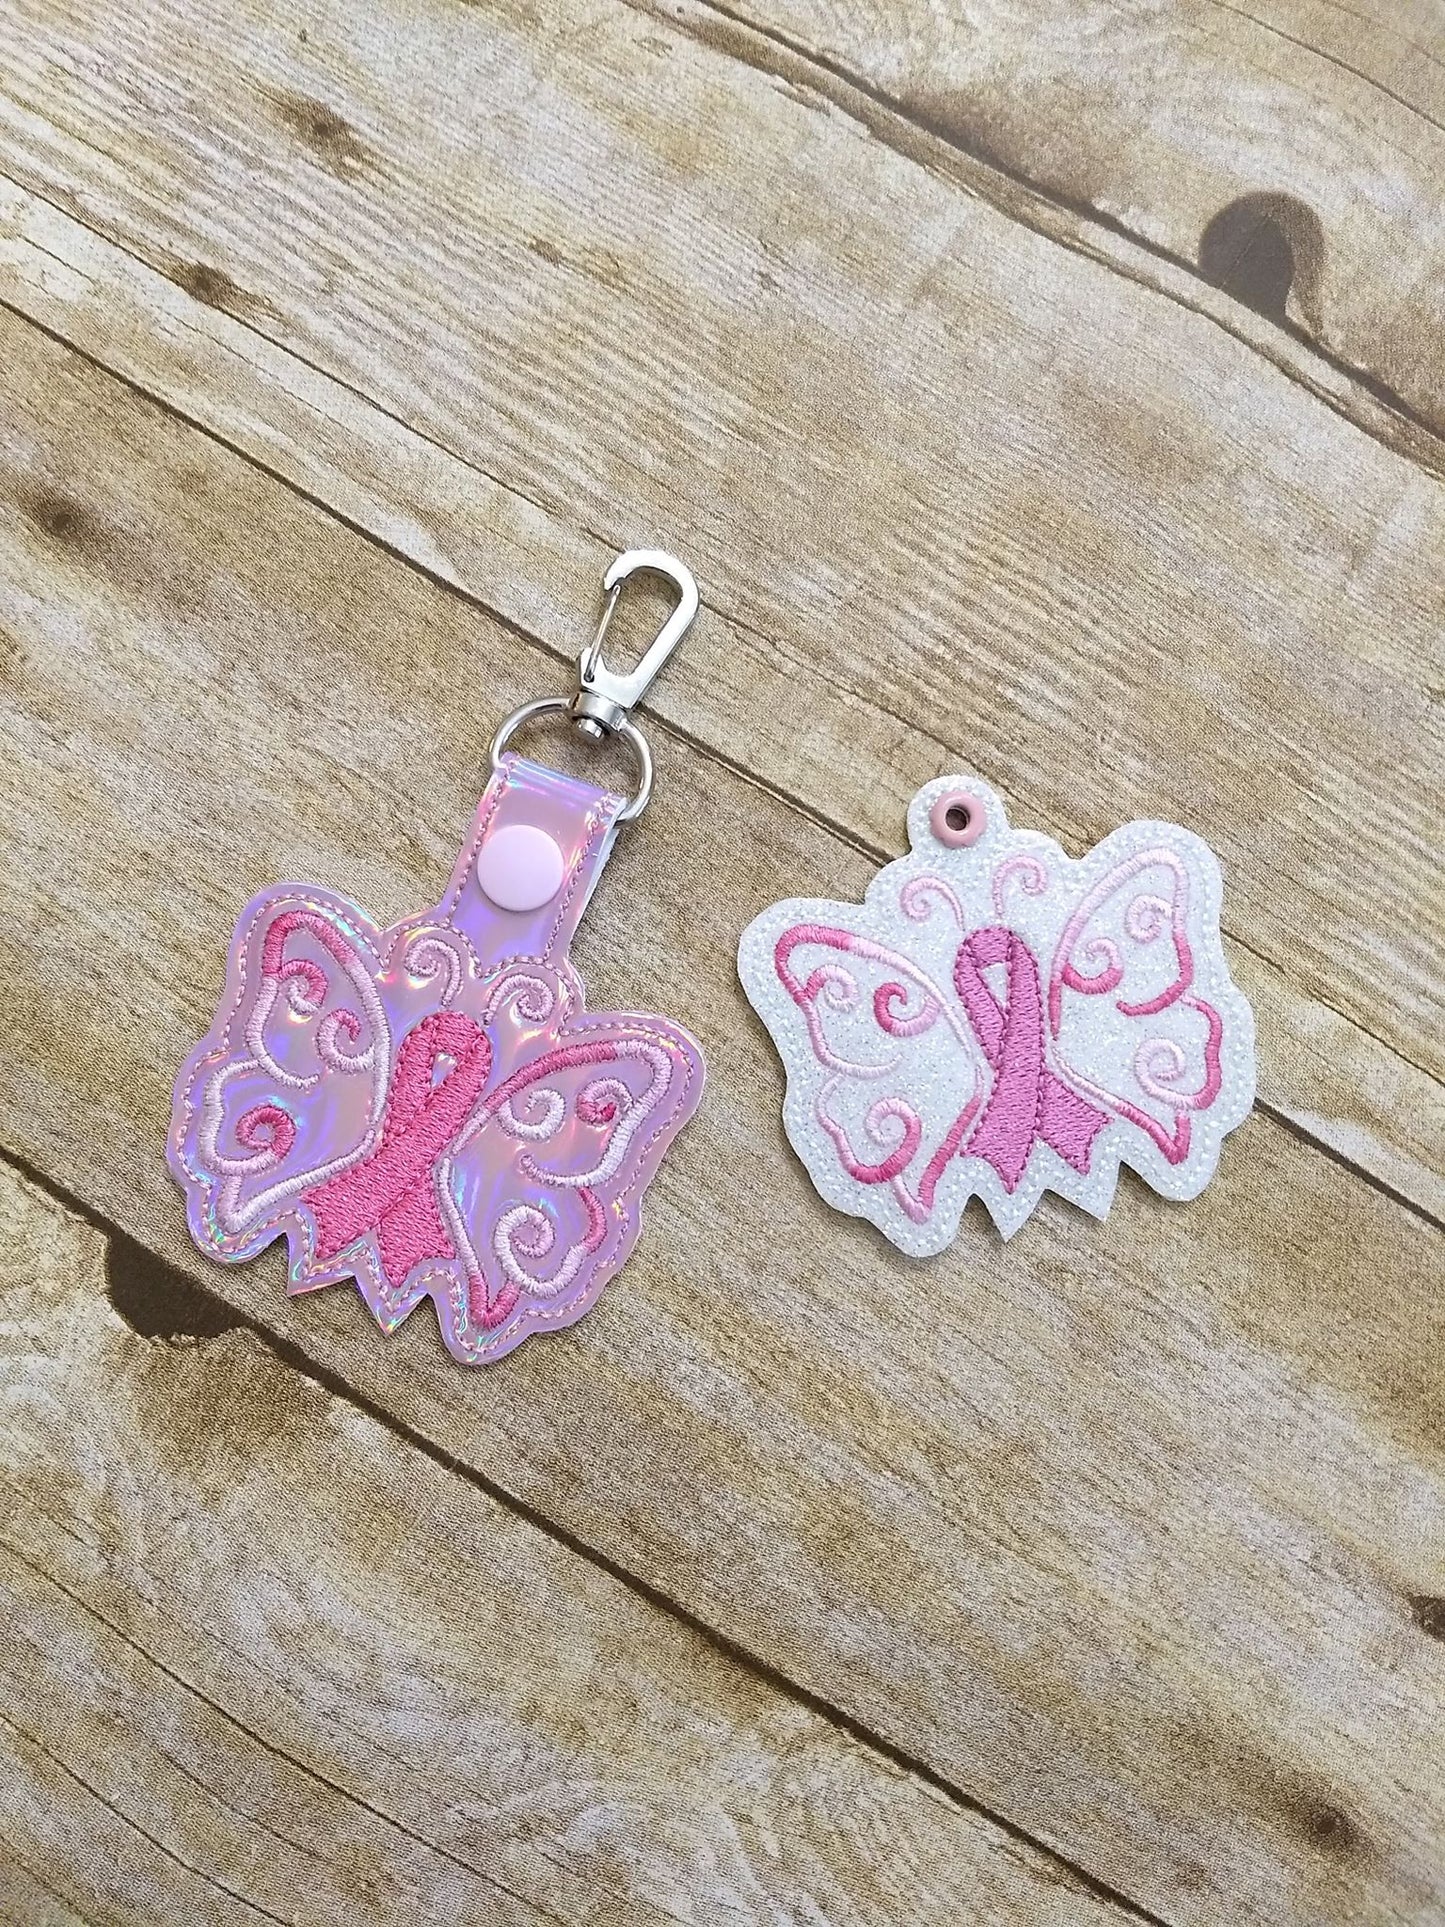 Awareness Butterfly Fobs - DIGITAL Embroidery DESIGN